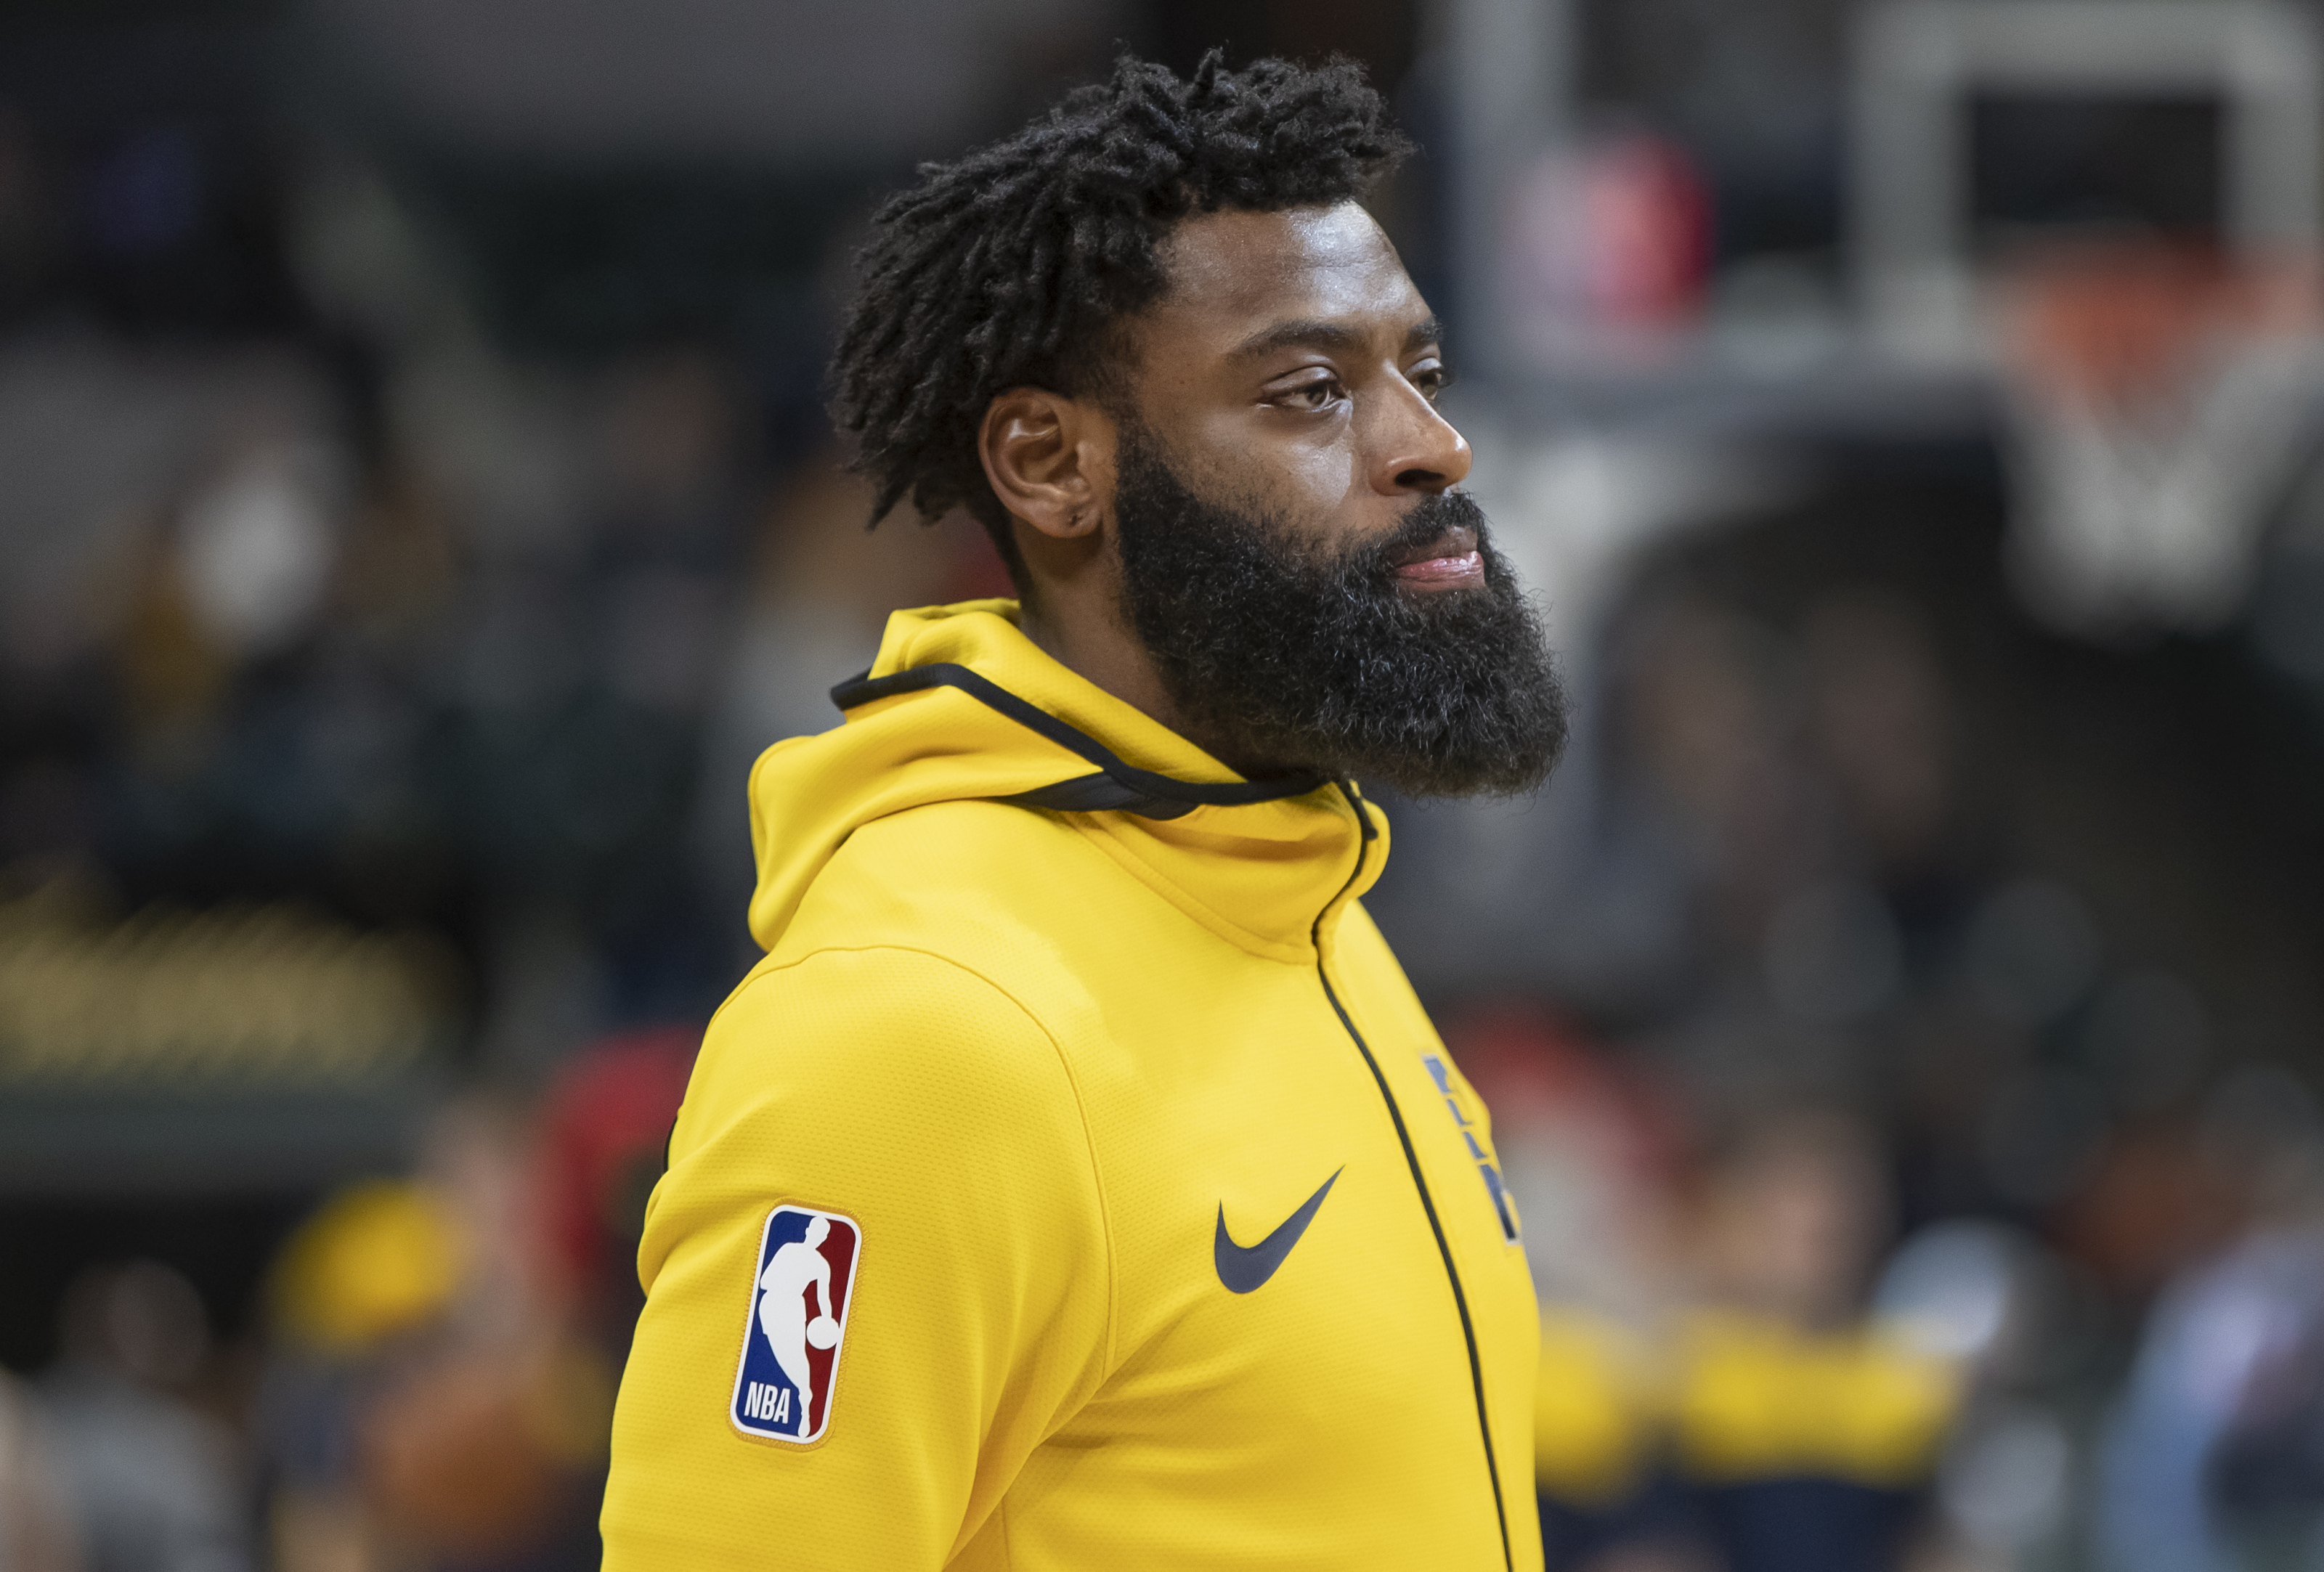 Tyreke Evans made his NBA G-League debut for the Wisconsin Herd